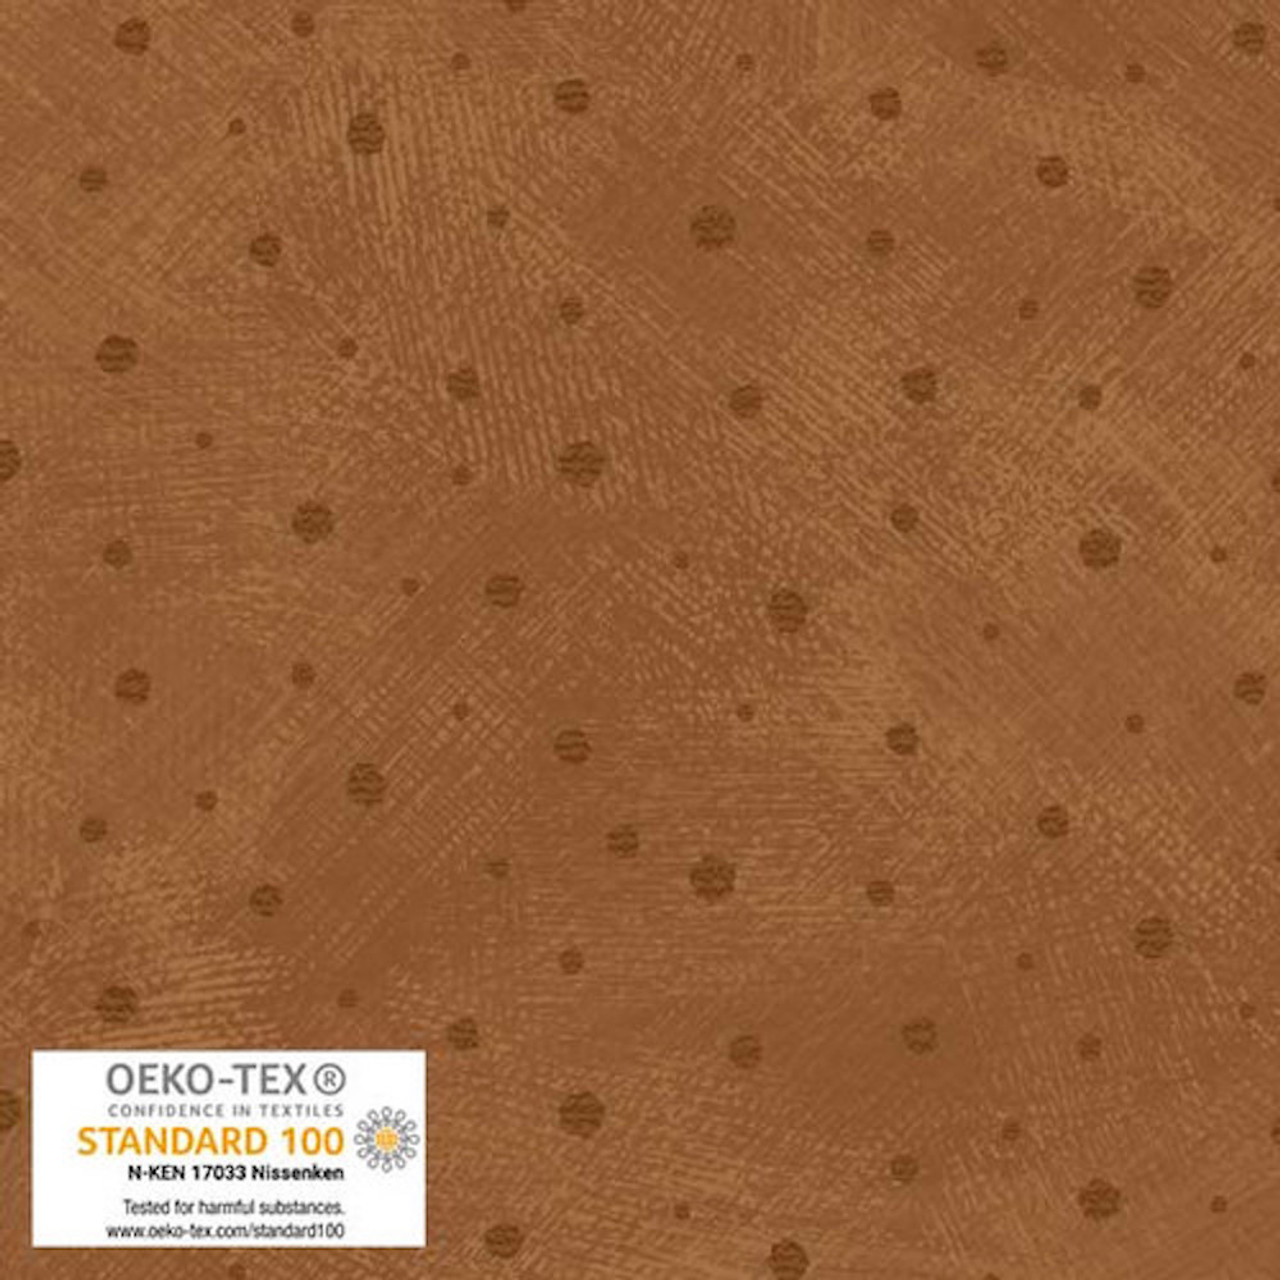 Stof European Quilting Medley Texture Dots Nut Cotton Fabric By The Yard